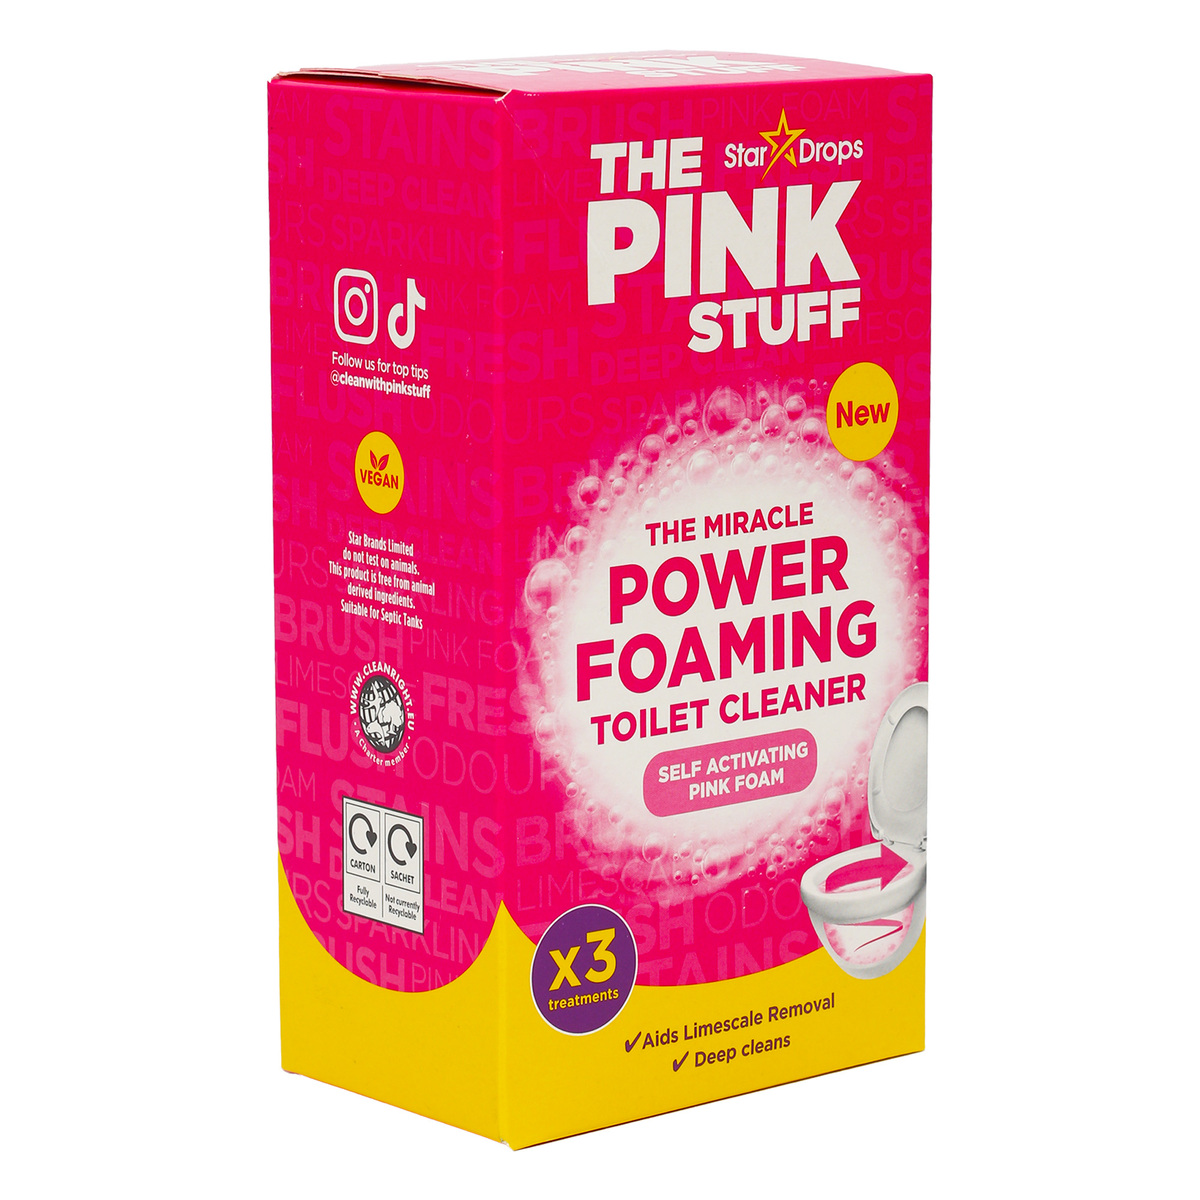 Stardrops Pink Stuff Miracle Power Foaming Toilet Cleaner 300 g